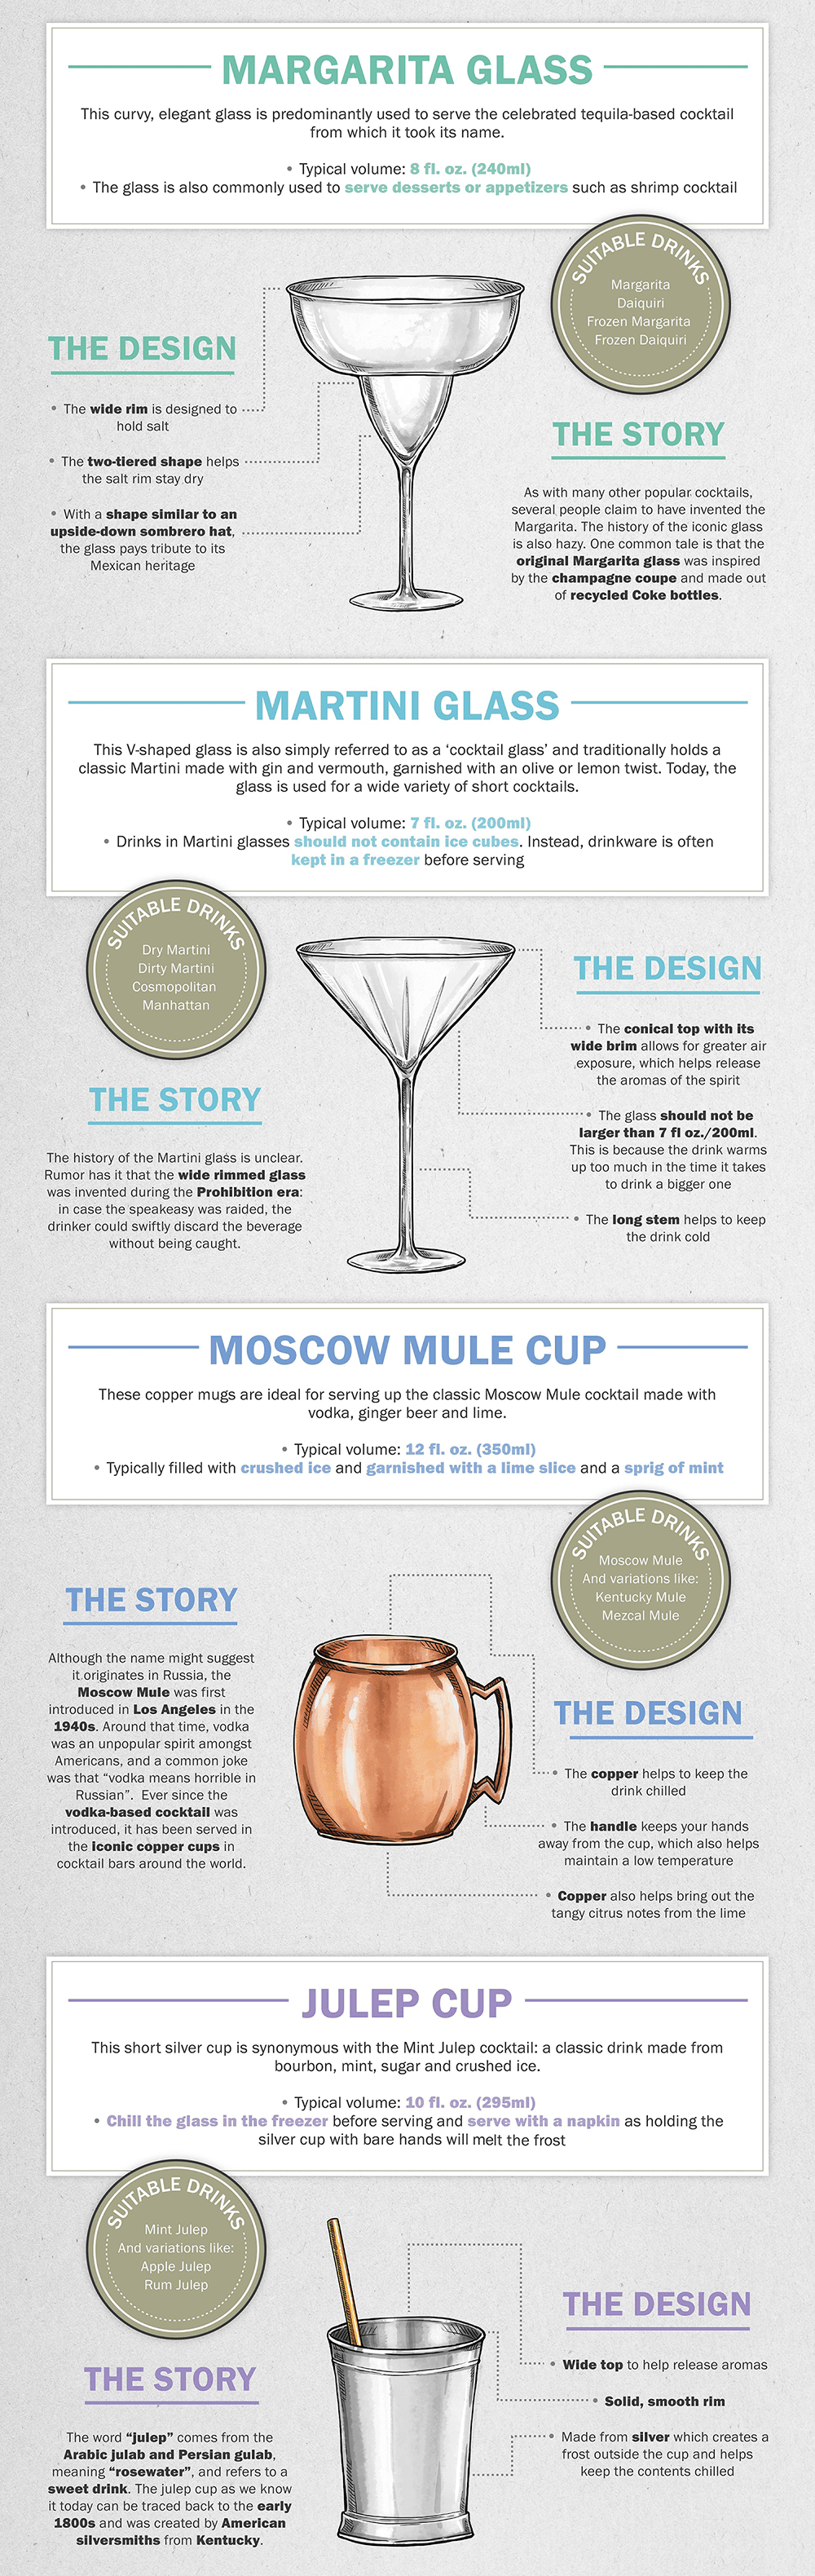 Alternate Uses for Martini Glasses When Planning an Event